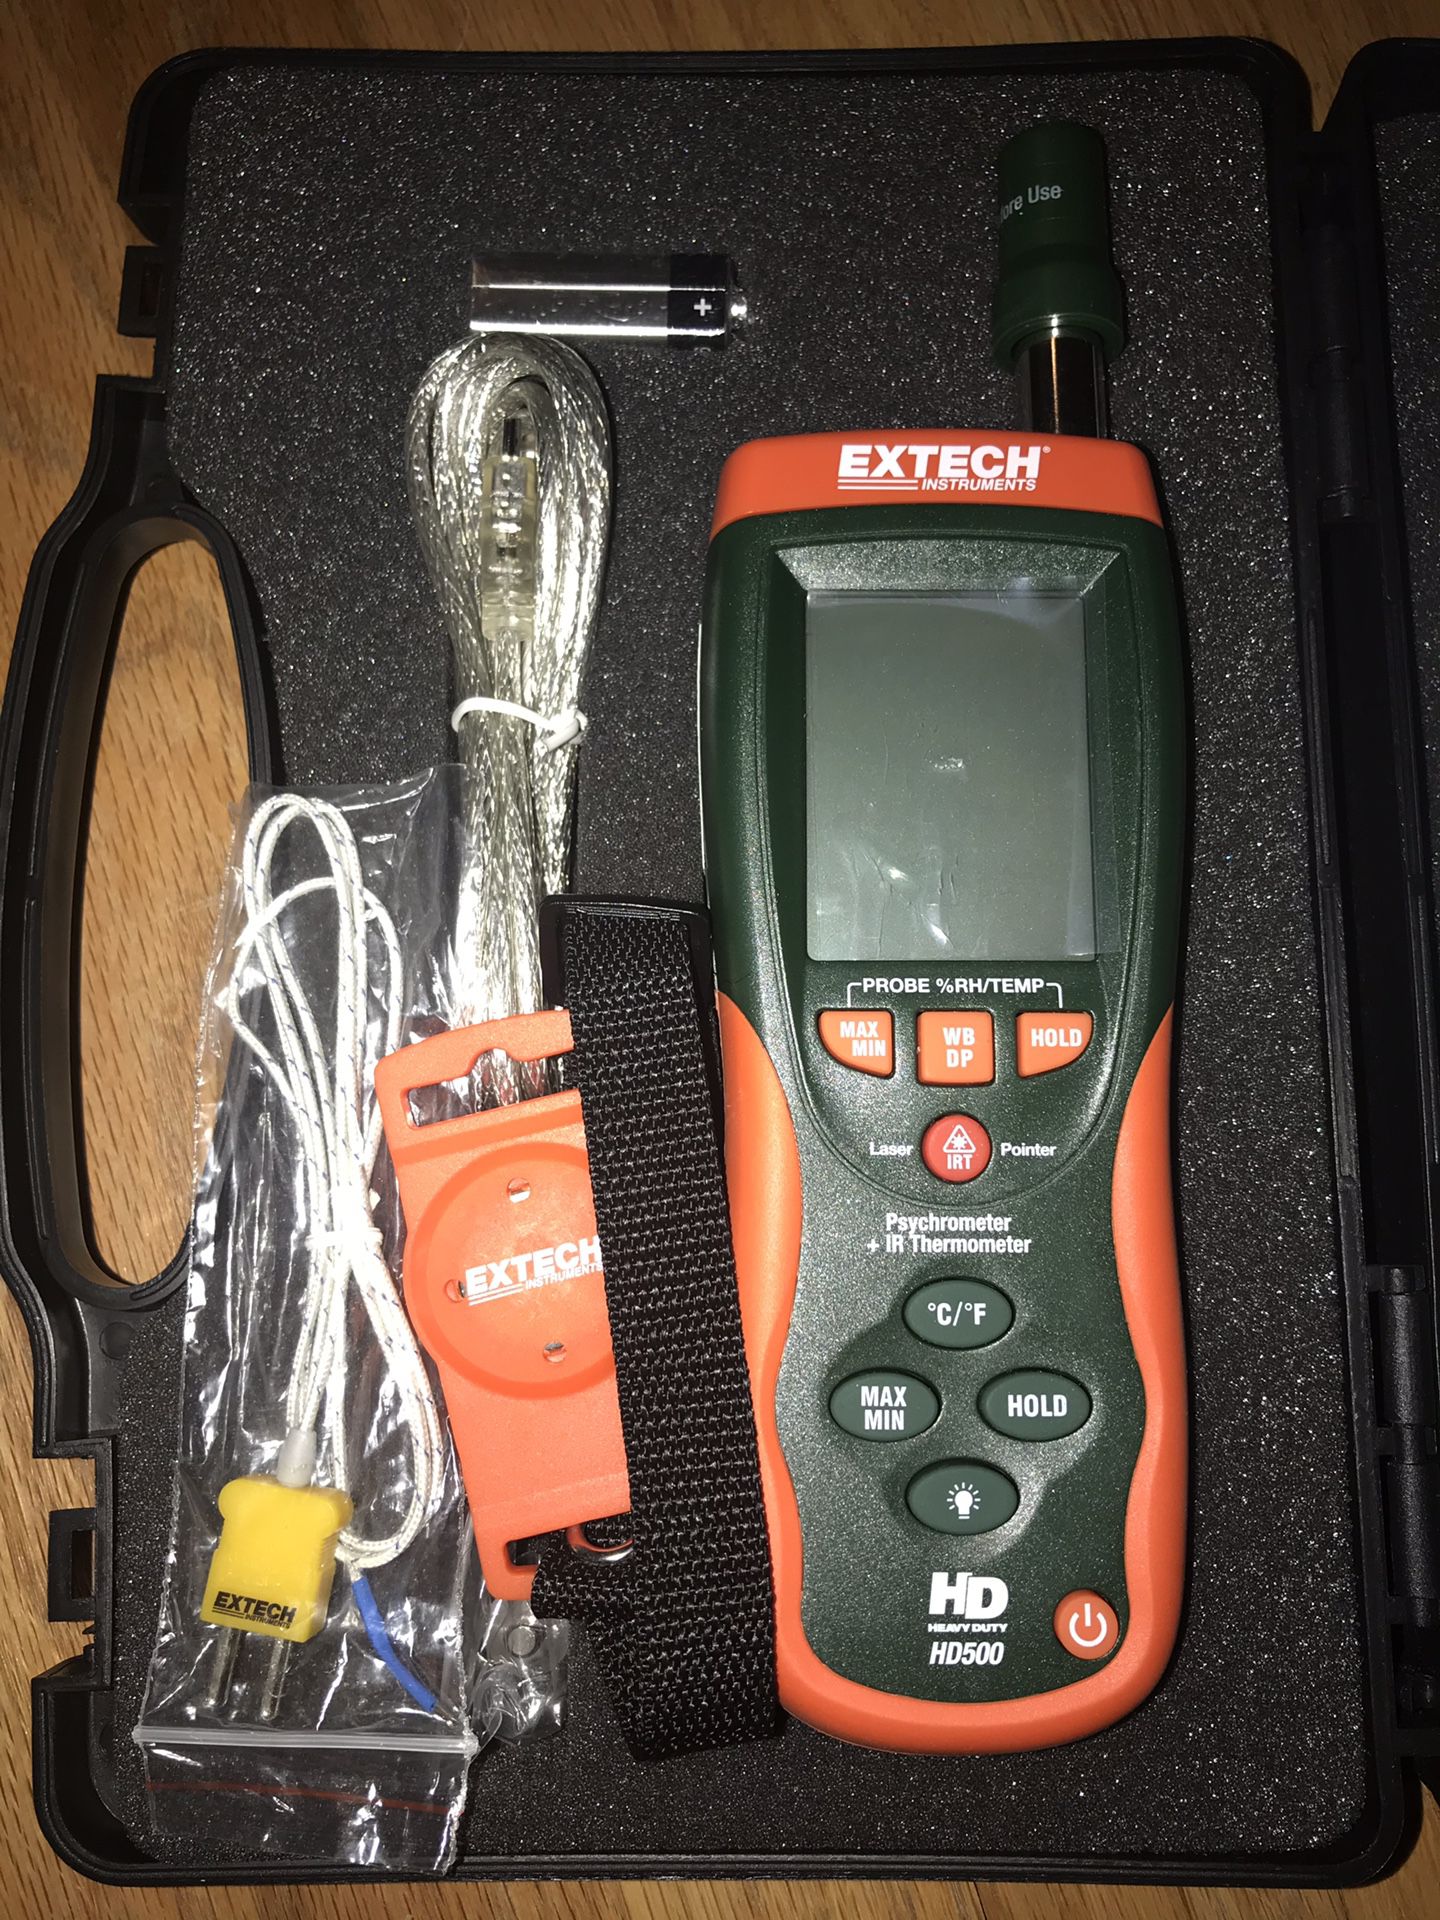 EXTECH HEAVY DUTY PSYCHROMETER + IR THERMOMETER